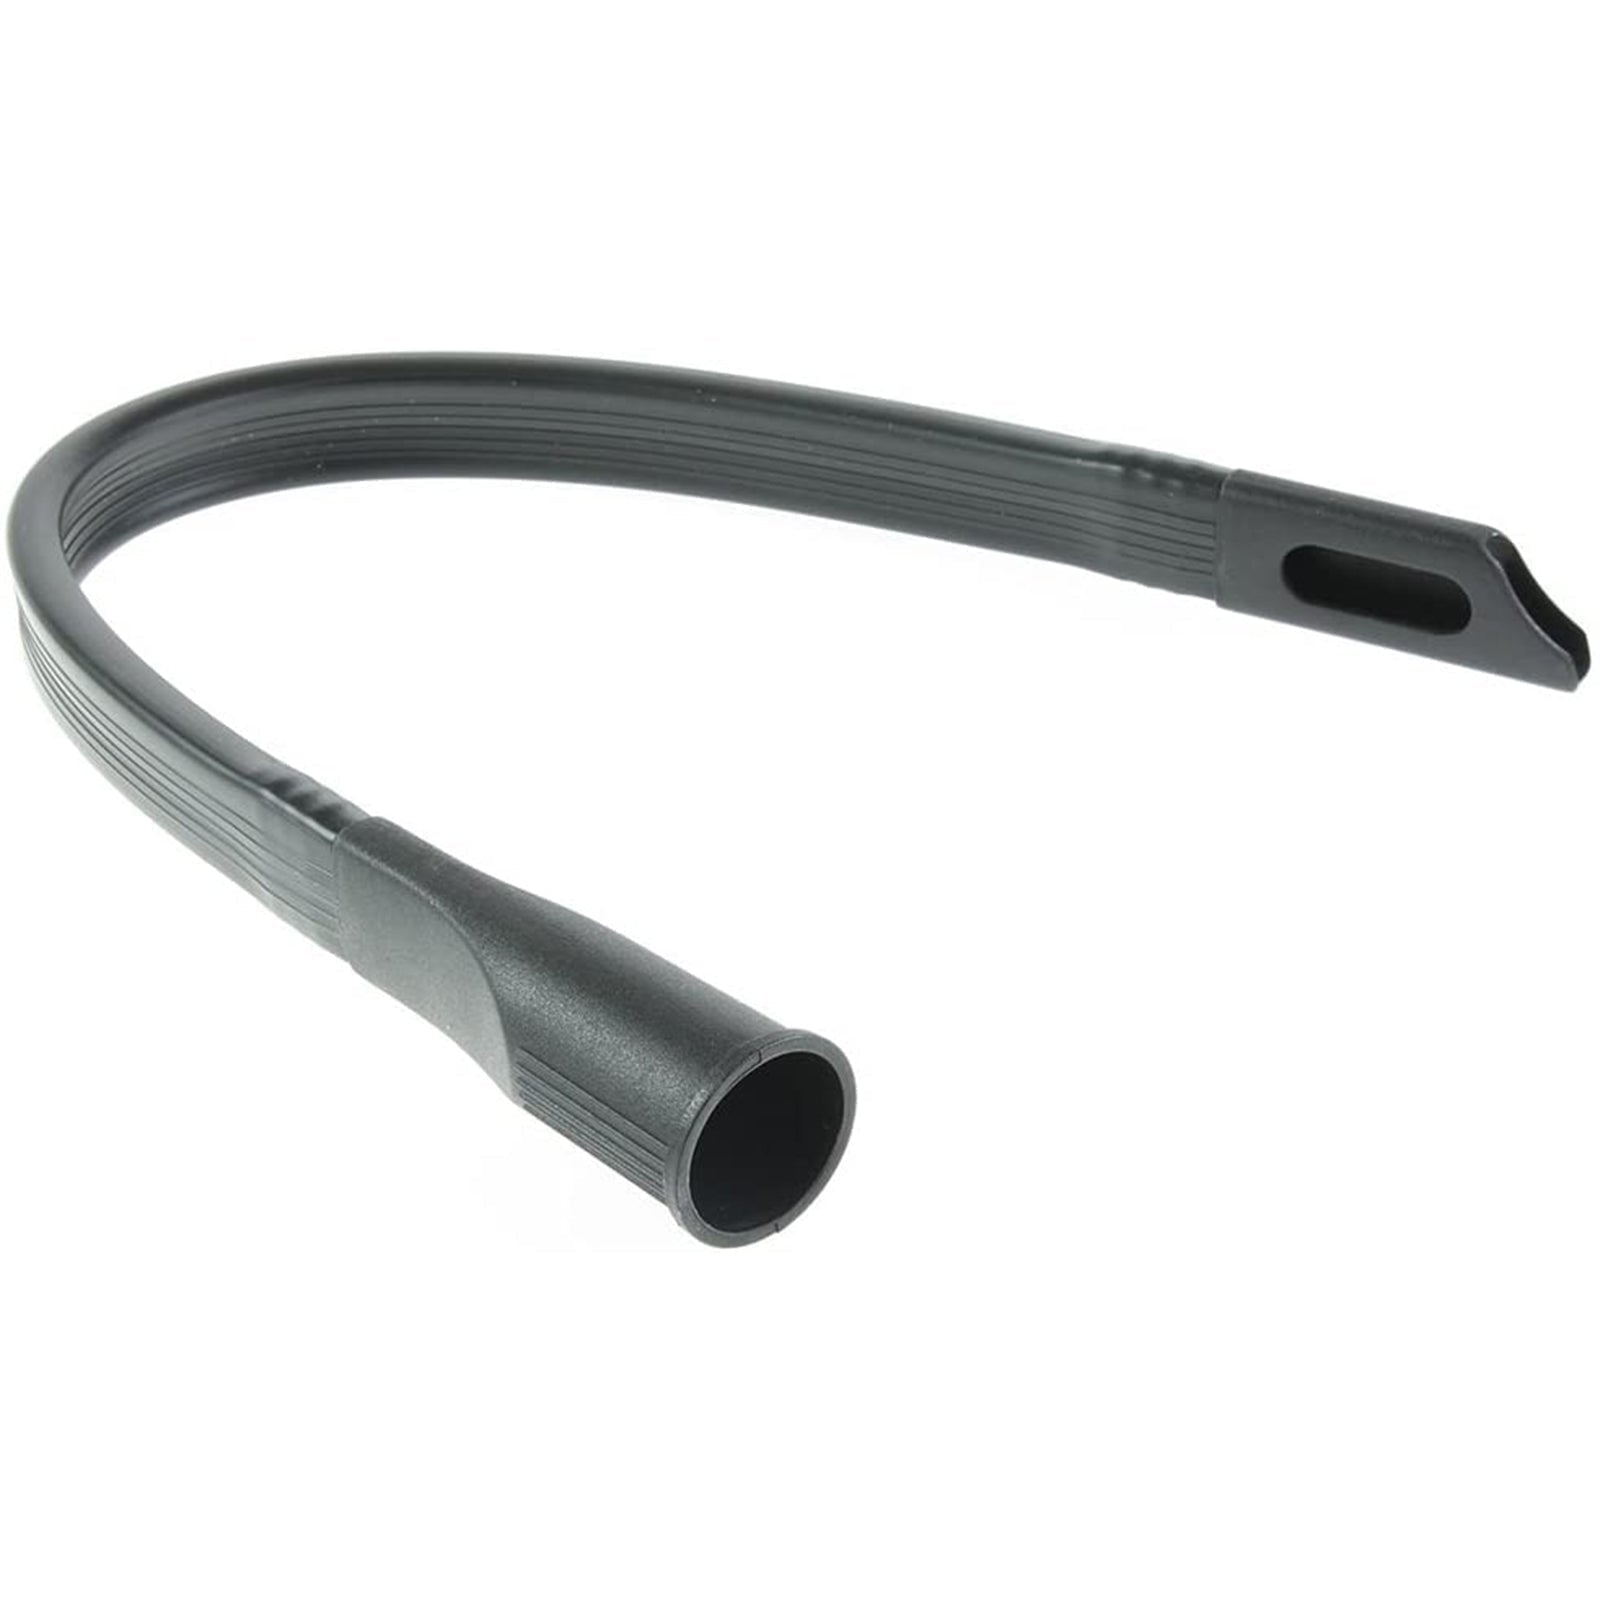 Flexible Crevice Tool Extra Long compatible with SHOPVAC Vacuum Cleaner (32mm or 35mm)